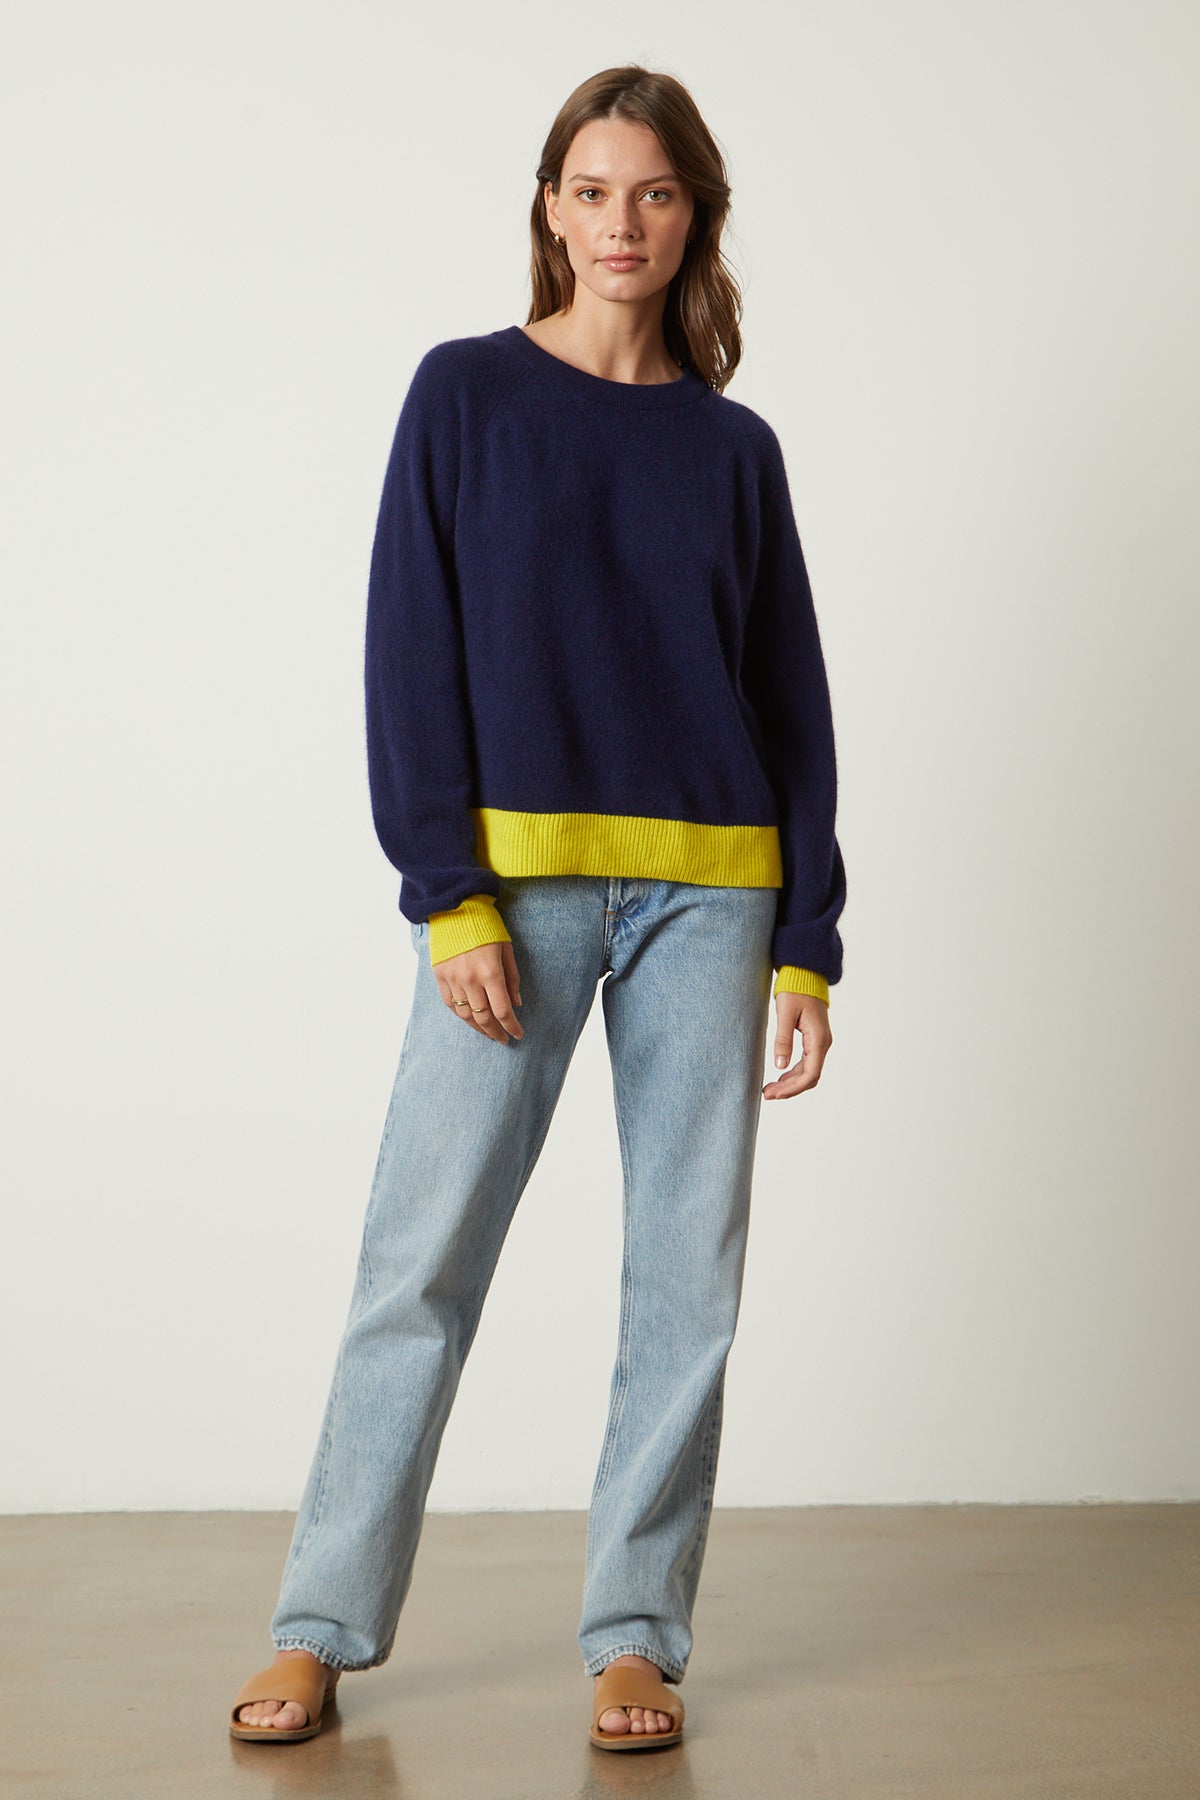   Claire Sweater in navy with yellow contrast at the cuffs and hemline with blue denim full length front 